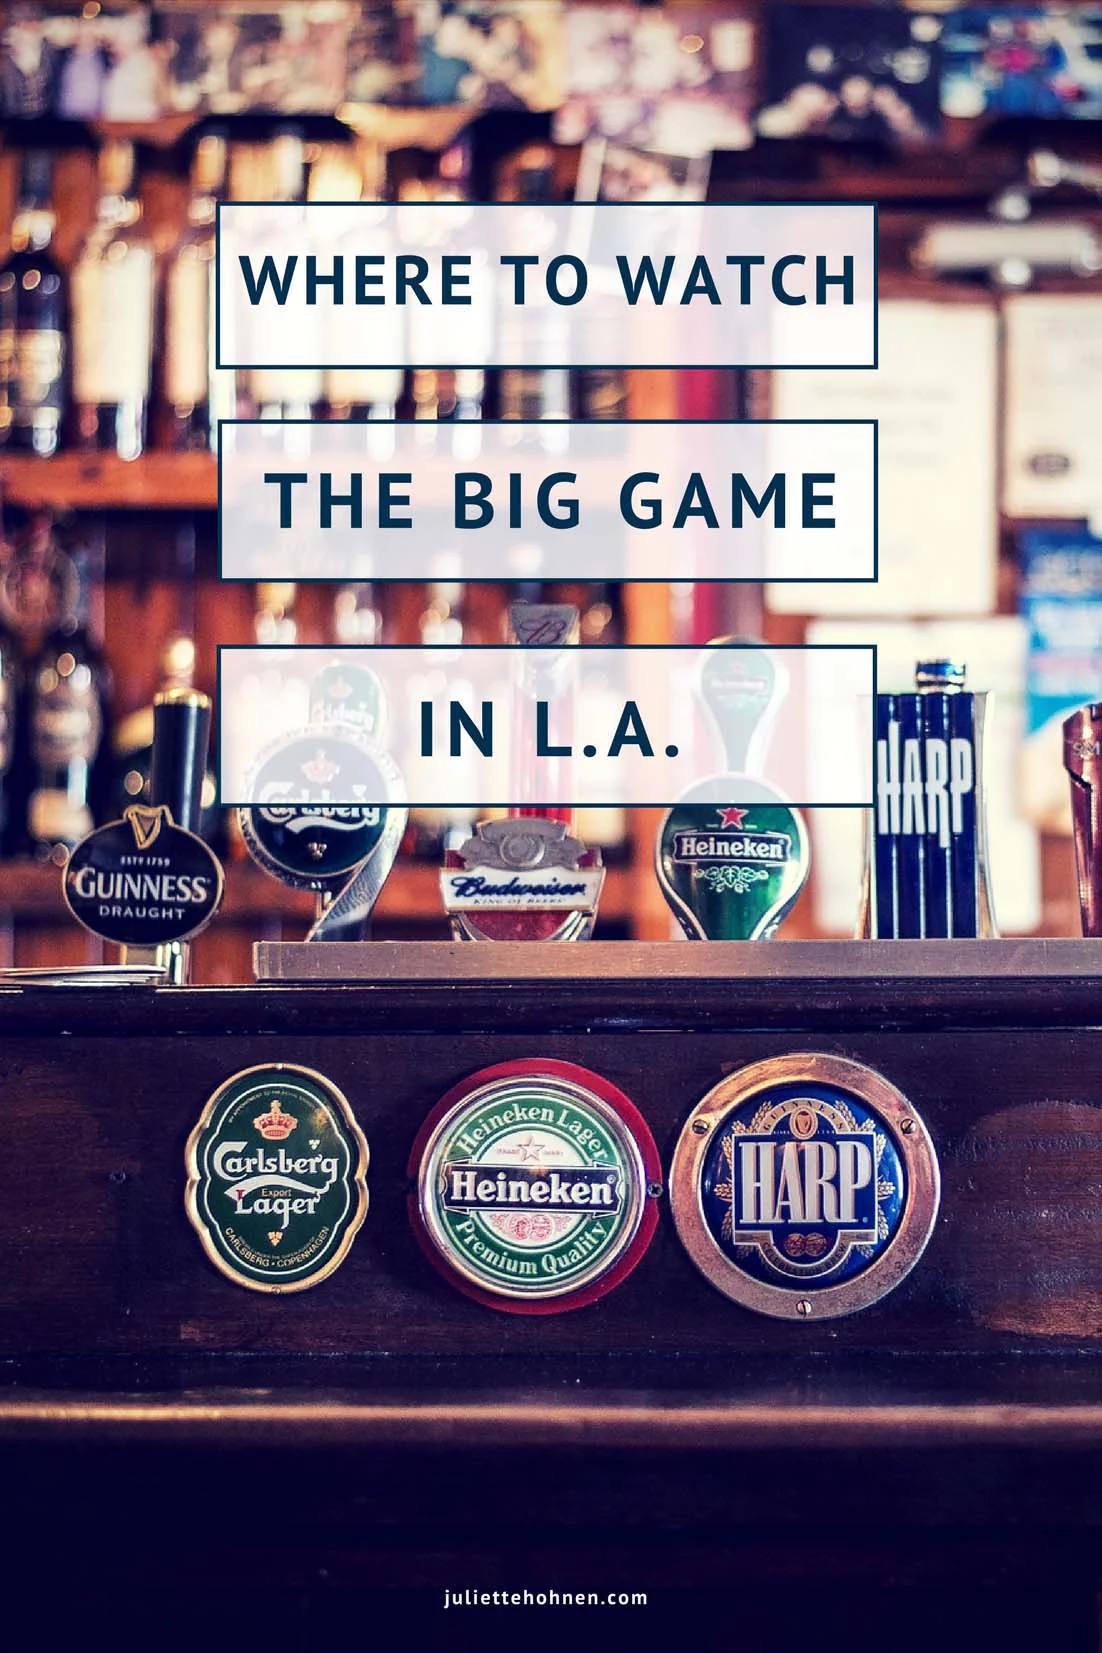 Where to Watch the Big Game in L.A.